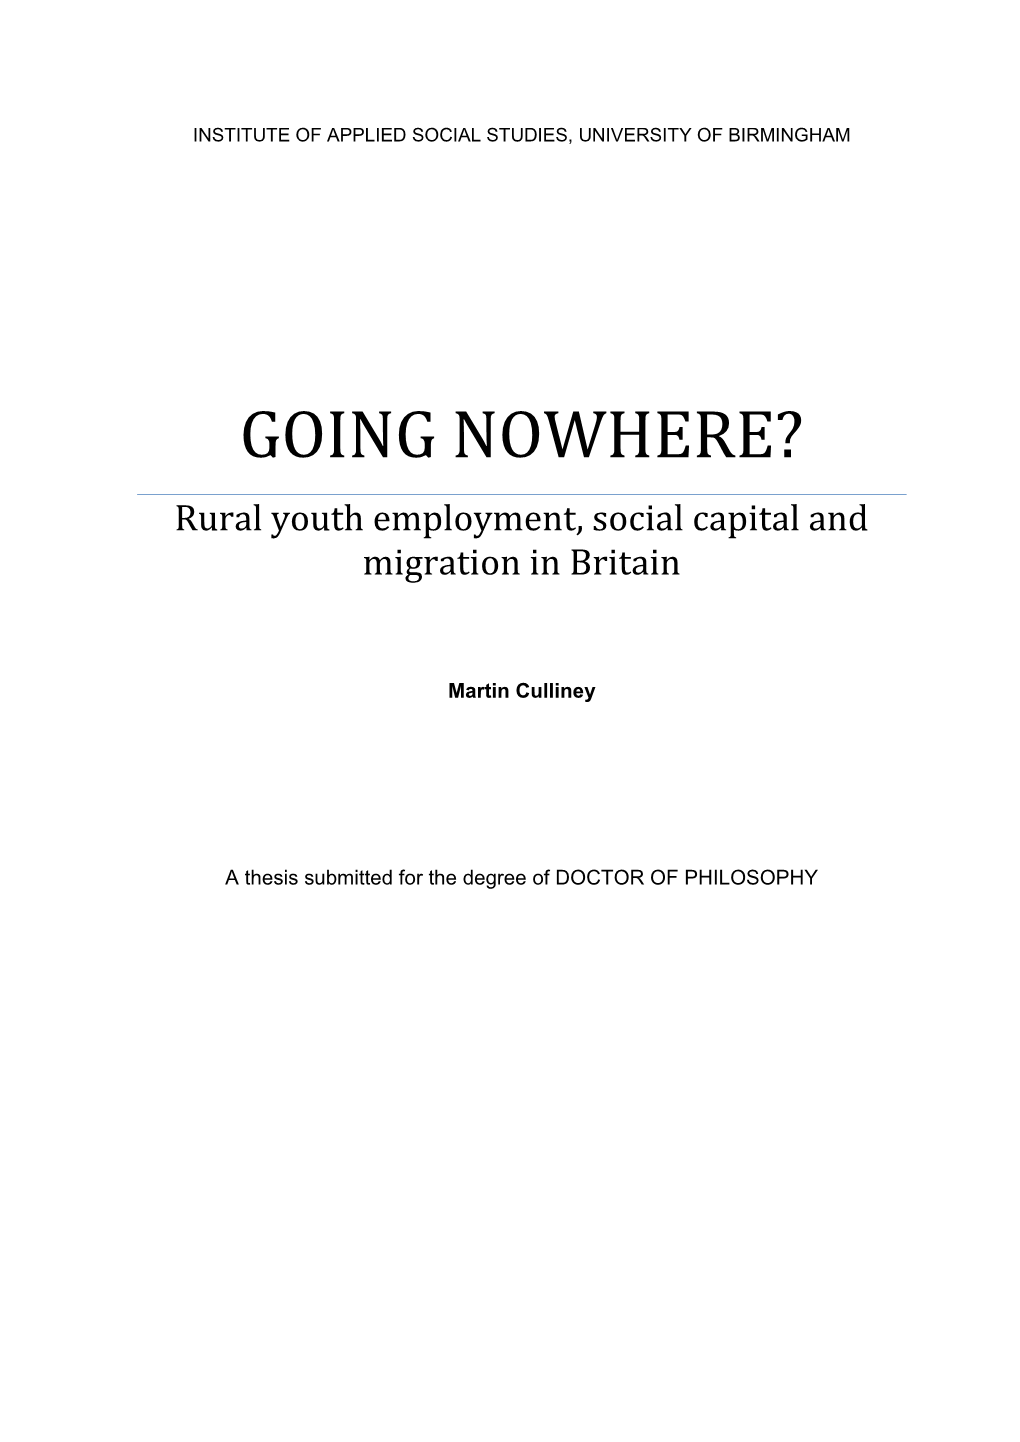 Rural Youth Employment, Social Capital and Migration in Britain